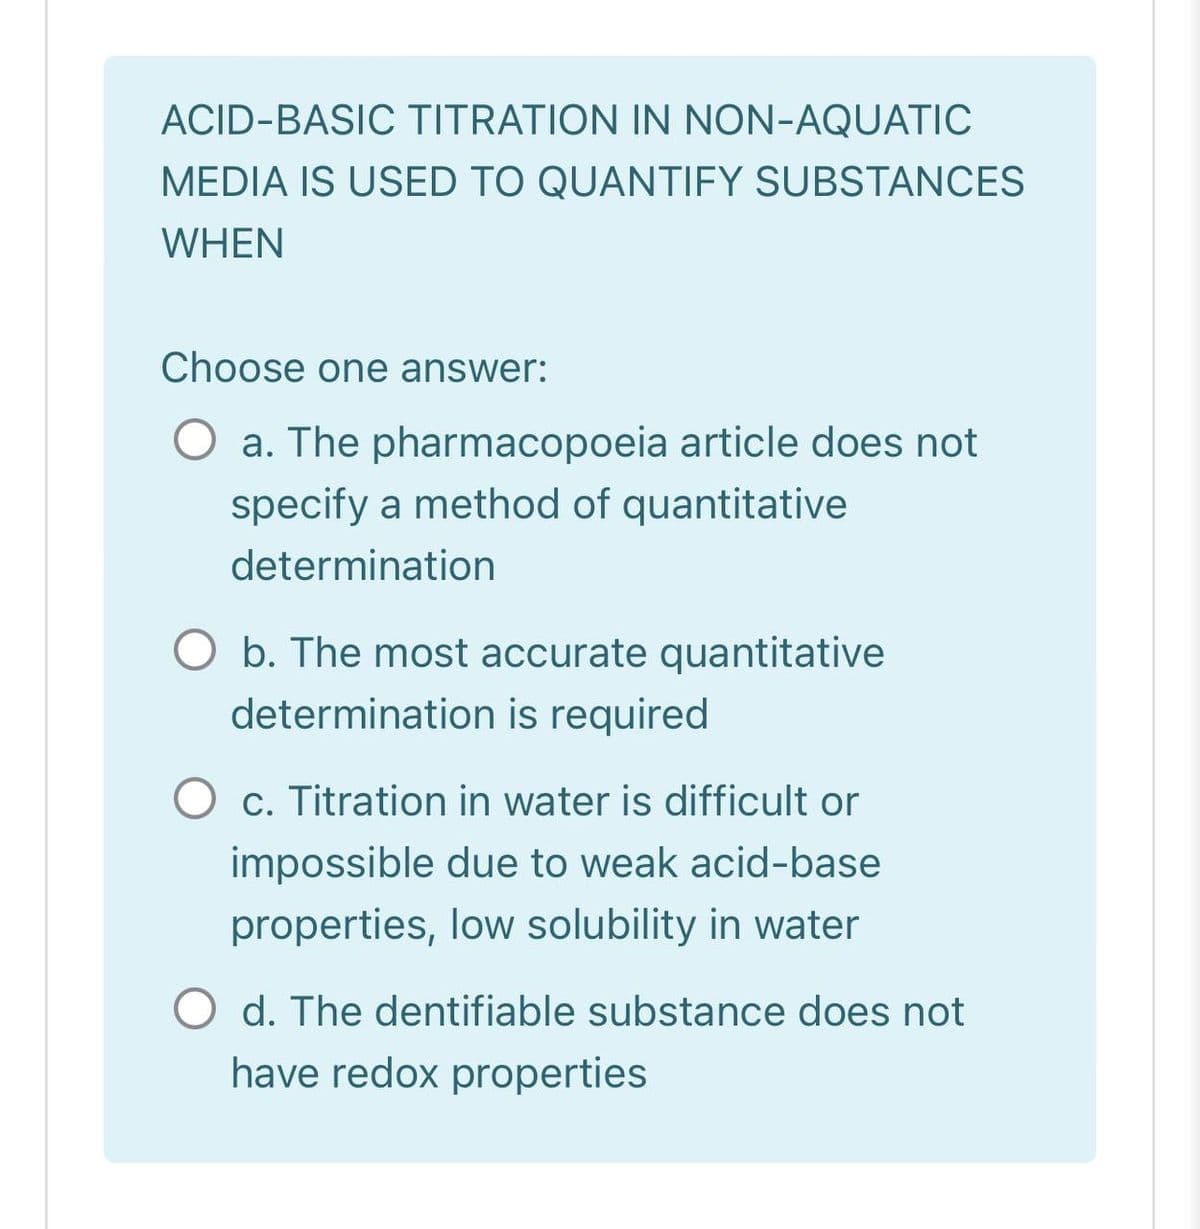 ACID-BASIC TITRATION IN NON-AQUATIC
MEDIA IS USED TO QUANTIFY SUBSTANCES
WHEN
Choose one answer:
a. The pharmacopoeia article does not
specify a method of quantitative
determination
O b. The most accurate quantitative
determination is required
O c. Titration in water is difficult or
impossible due to weak acid-base
properties, low solubility in water
O d. The dentifiable substance does not
have redox properties
